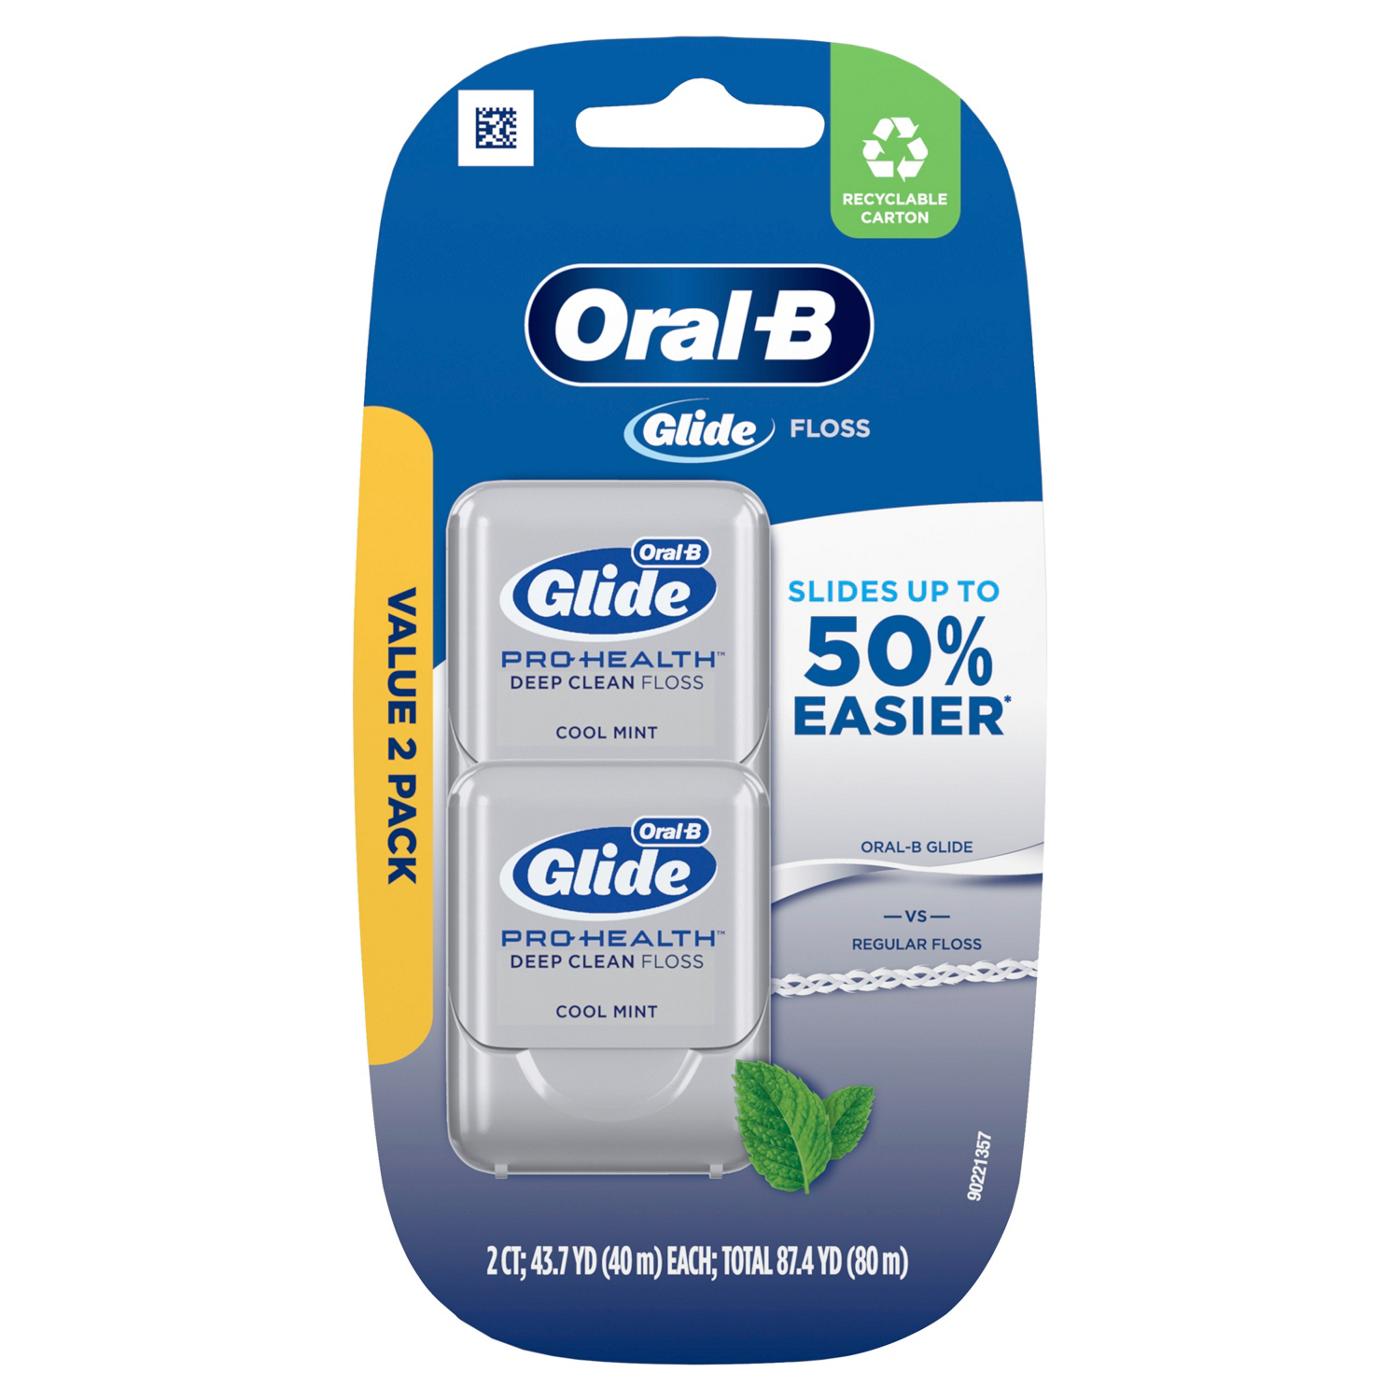 Oral-B Glide Pro-Health Deep Clean Dental Floss - Cool Mint; image 1 of 8